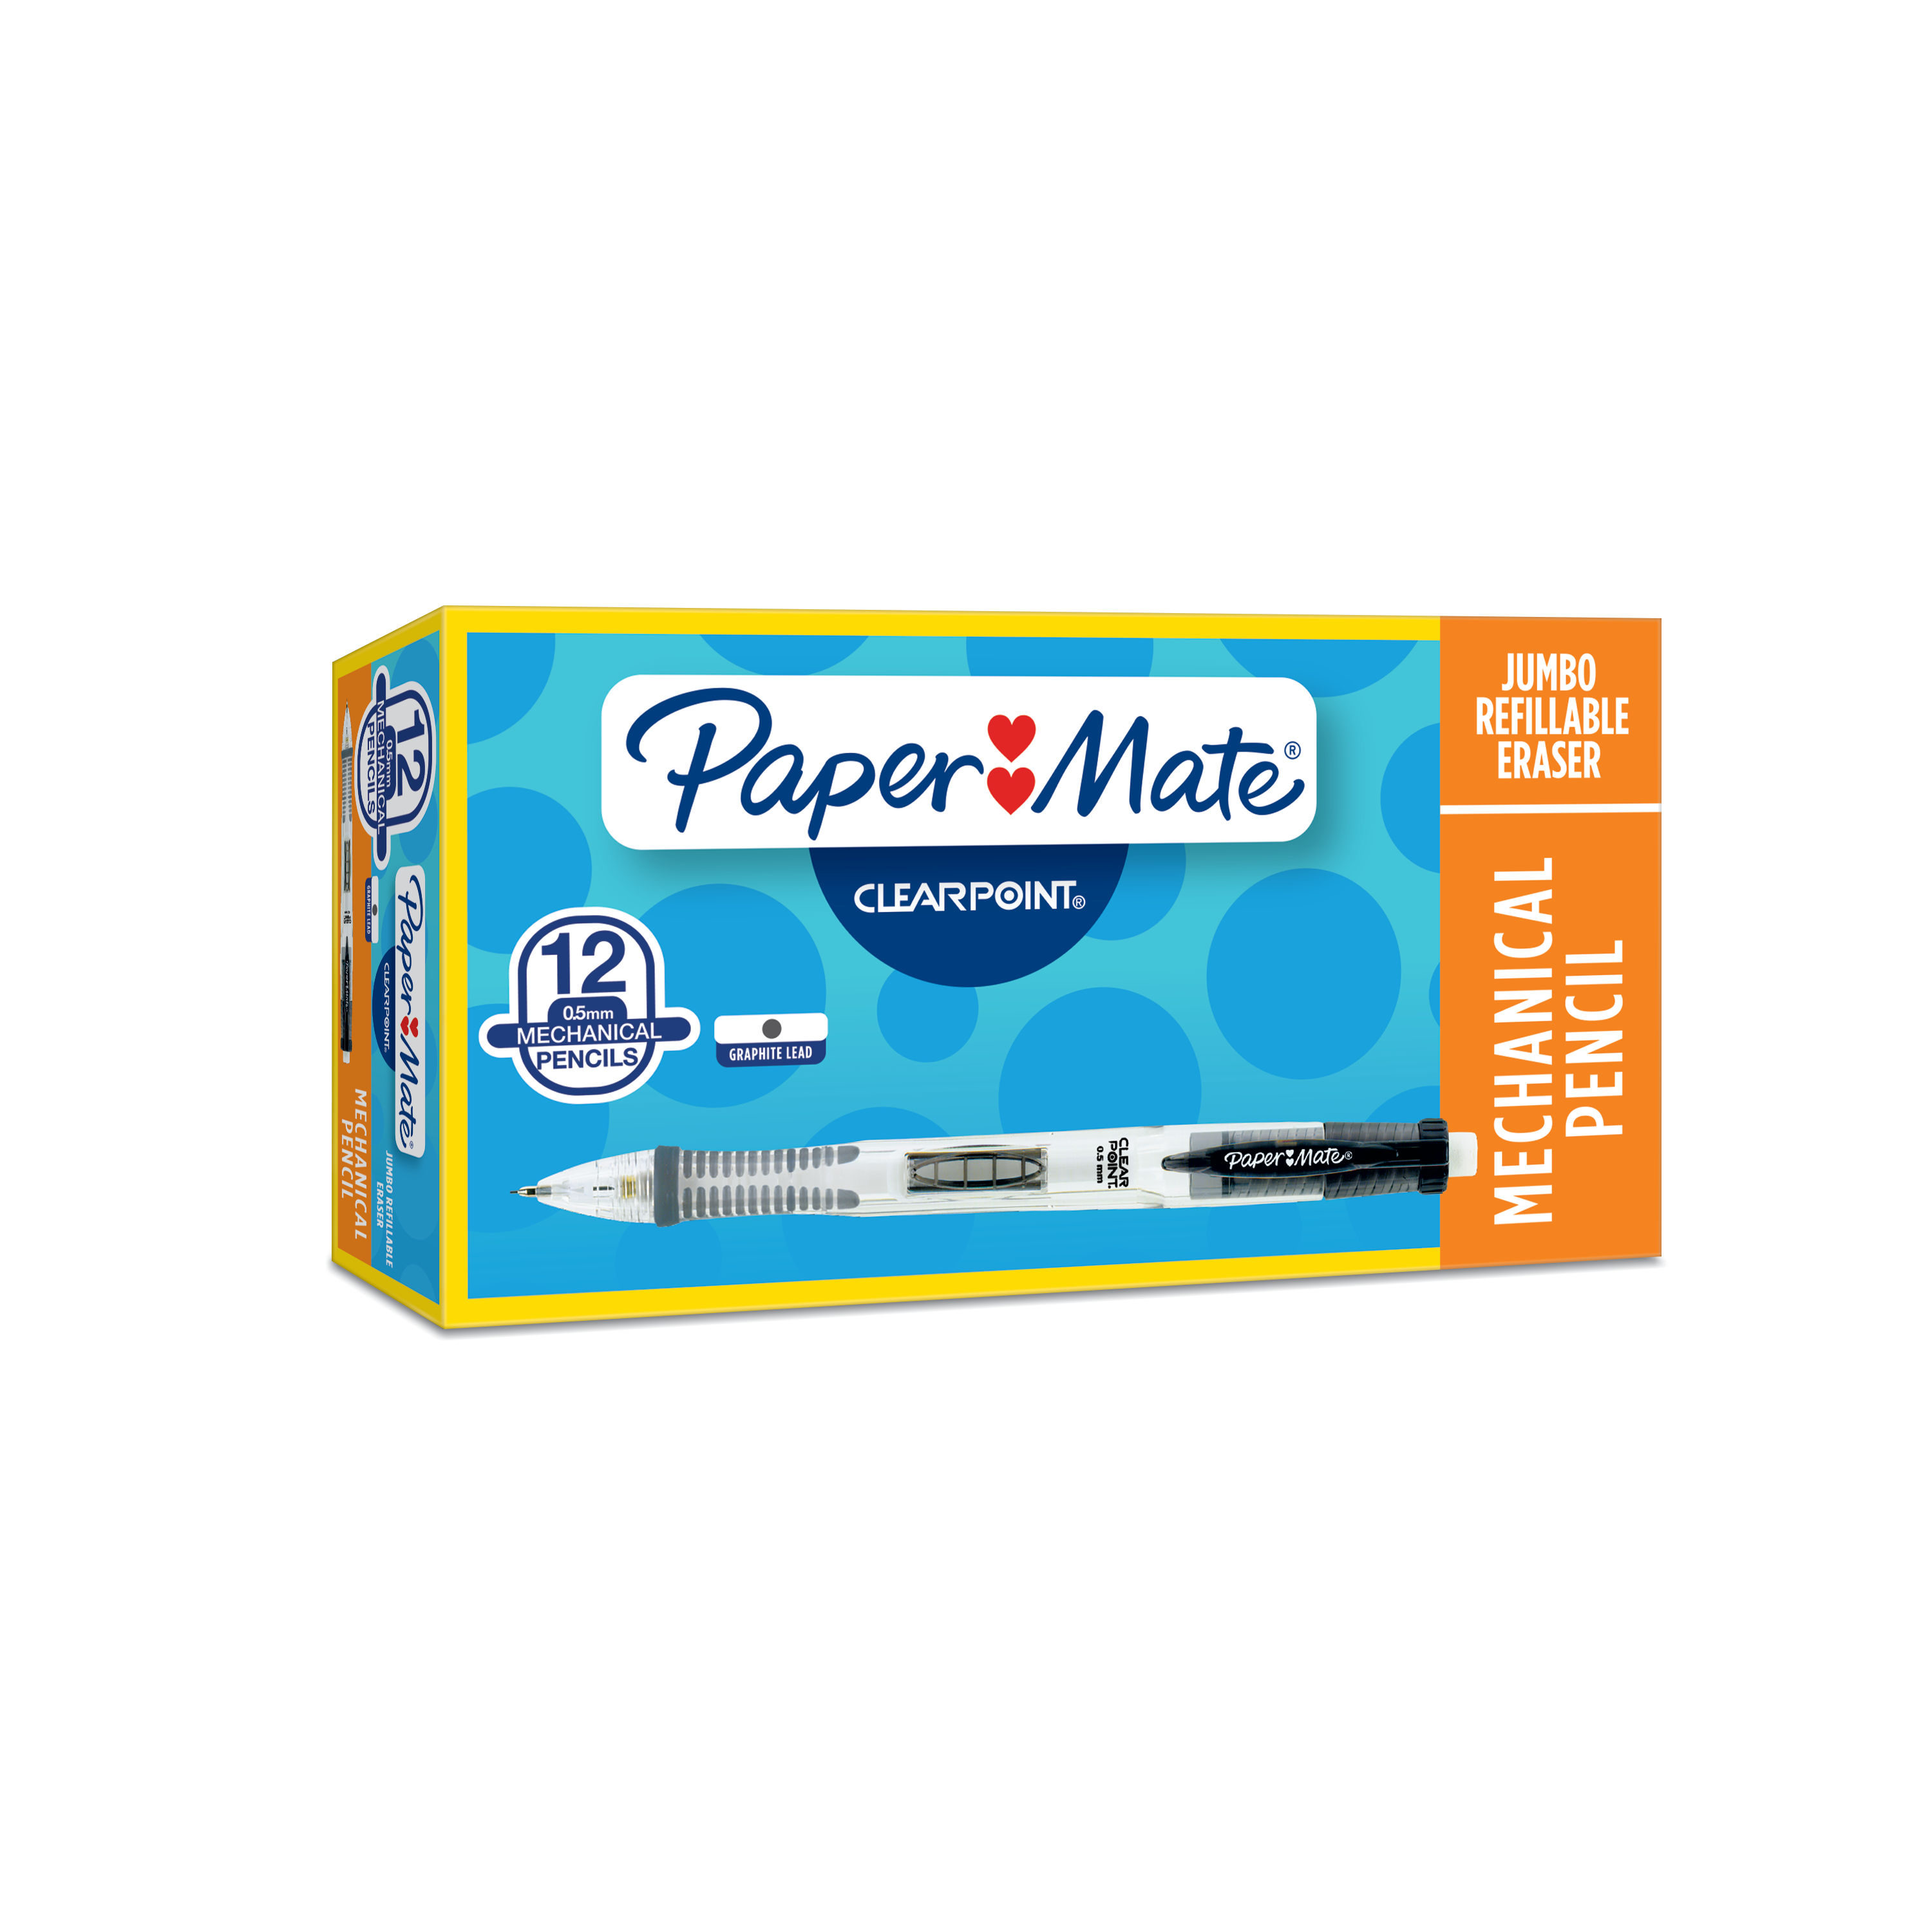  Paper Mate Clearpoint Mechanical Pencil 